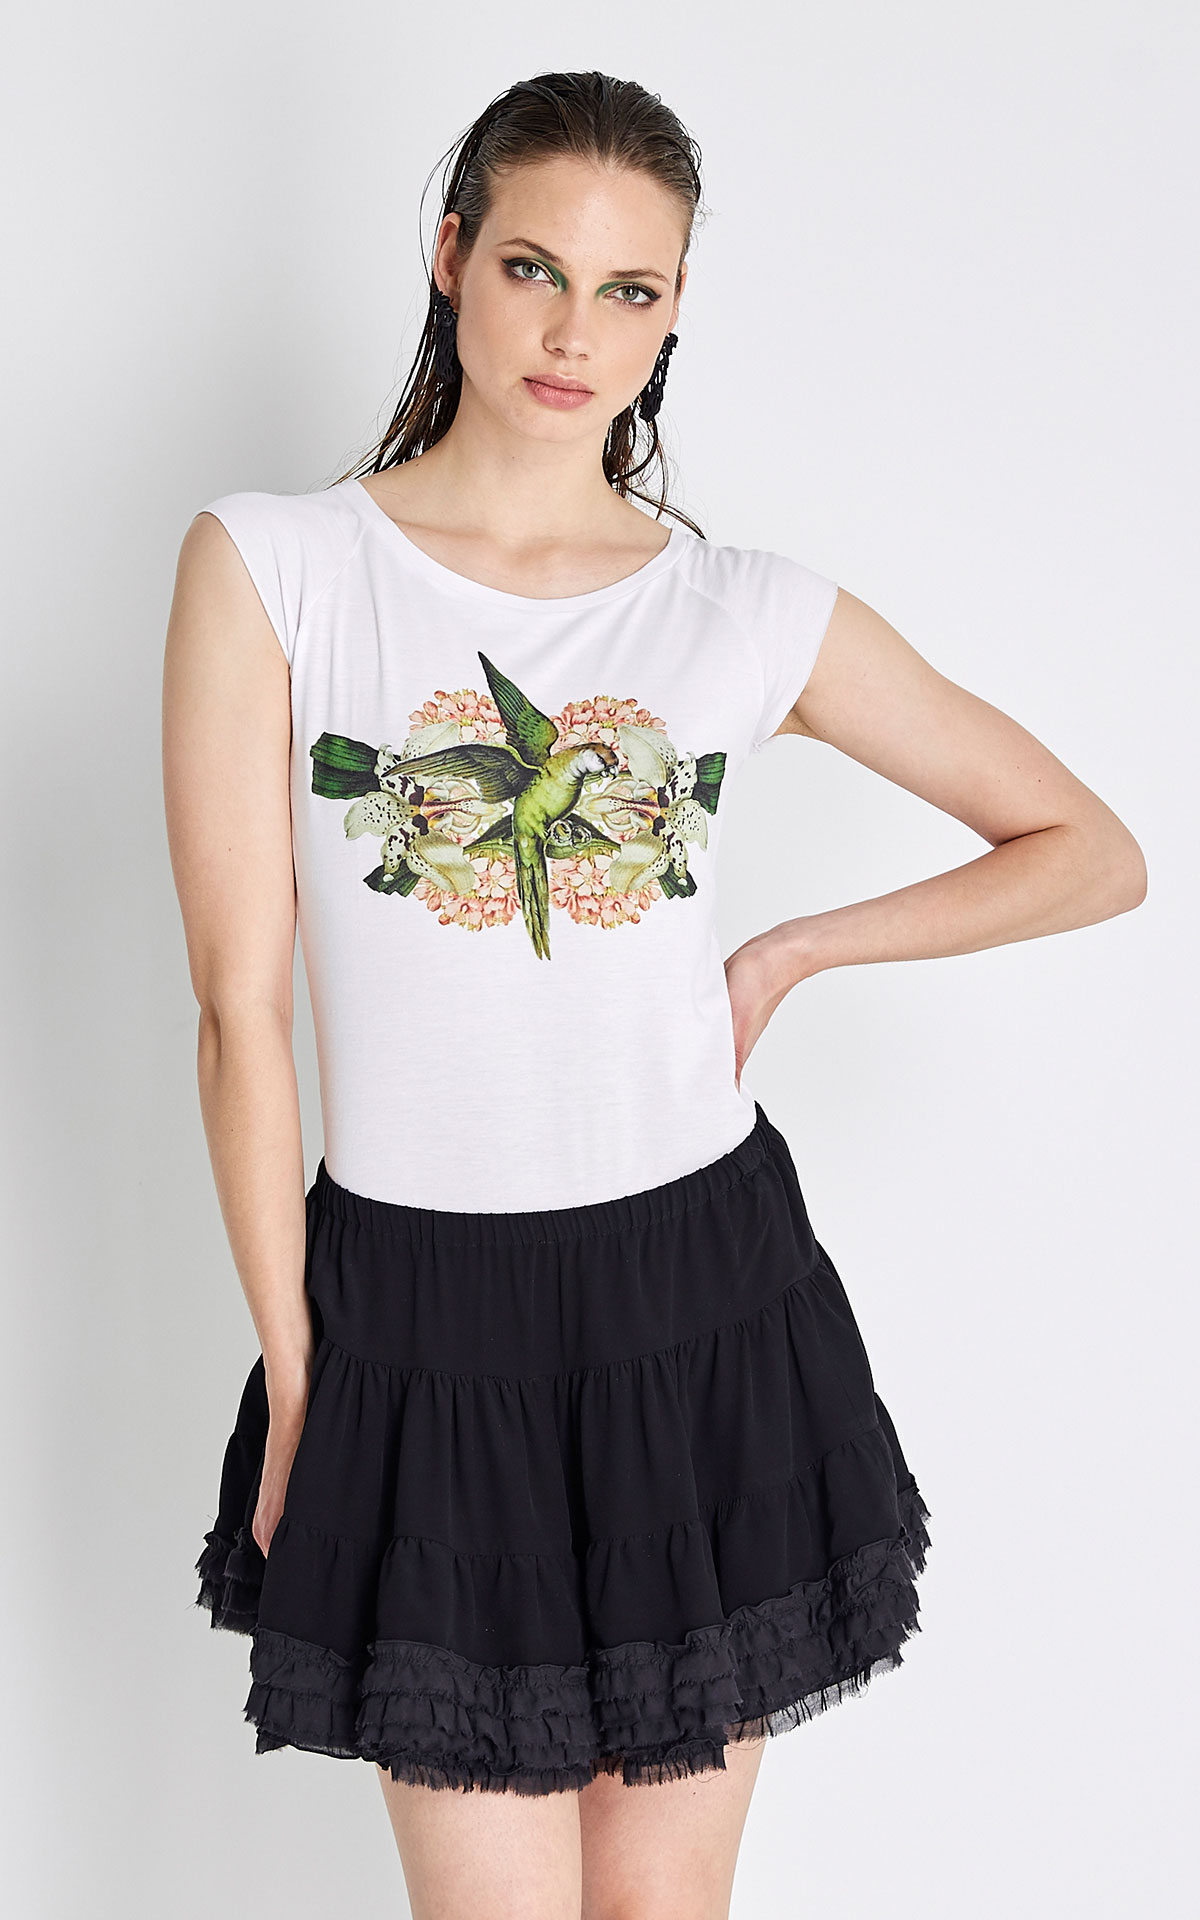 Benedetti Life Parrot t-shirt from Bicester Village